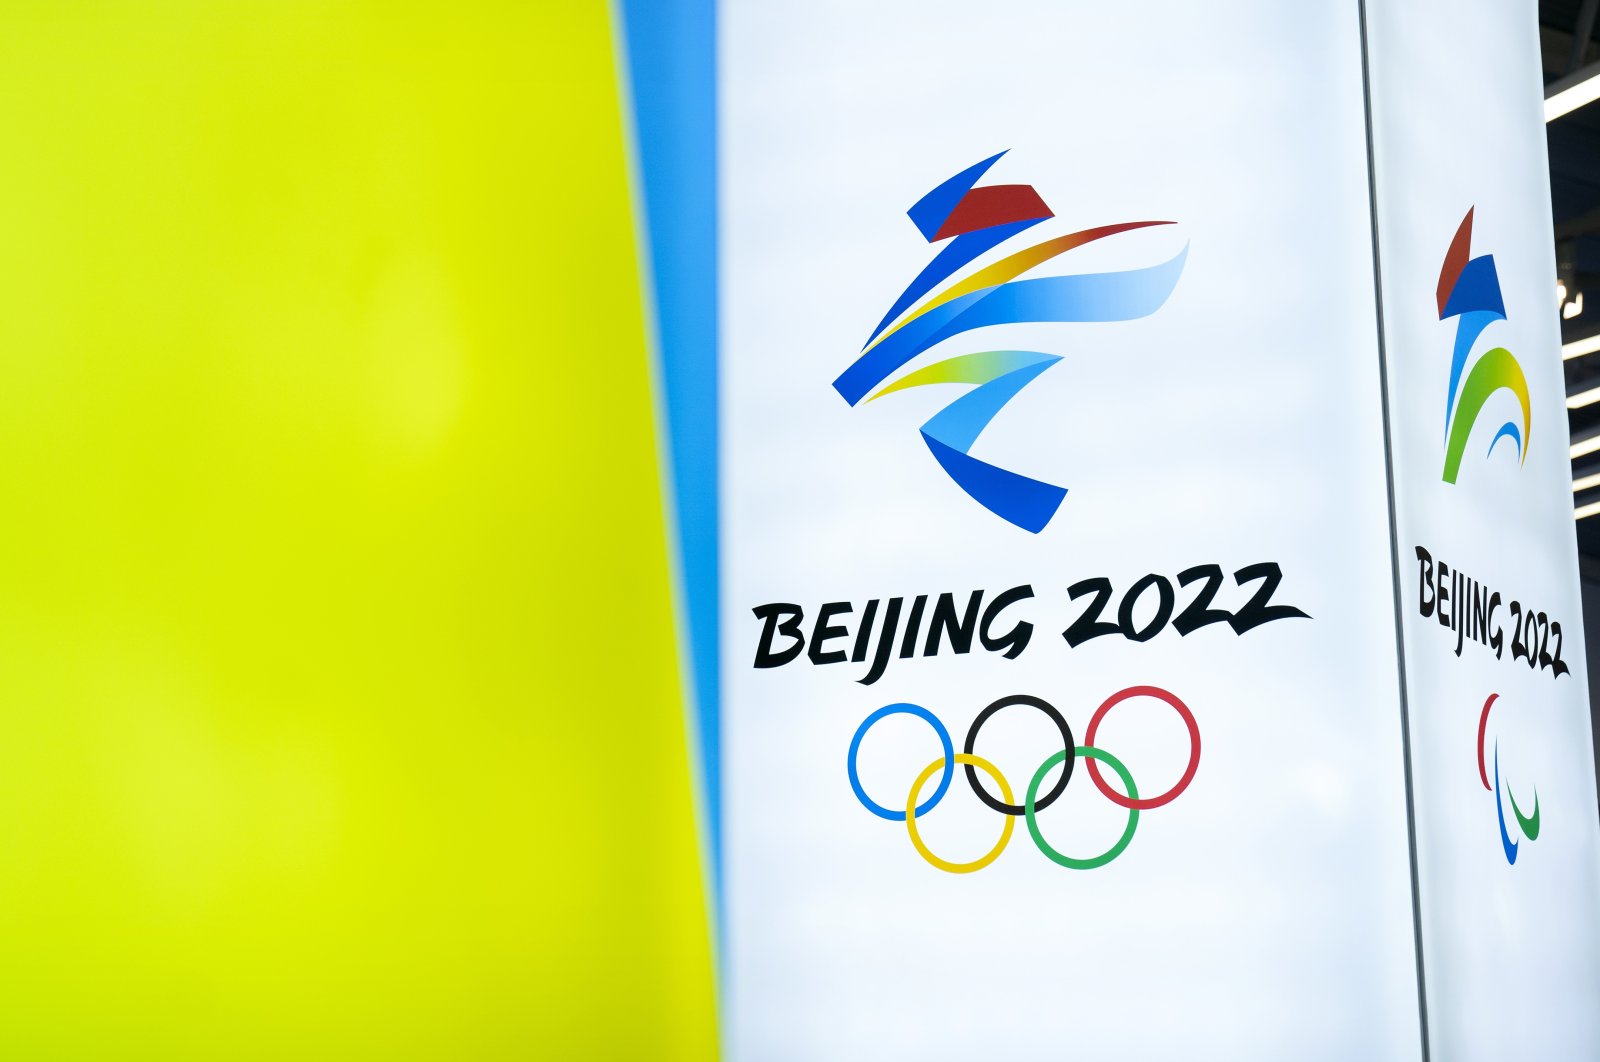 The logos for the 2022 Beijing Winter Olympics and Paralympics are seen in Beijing, China, Feb. 5, 2021. (AP Photo)